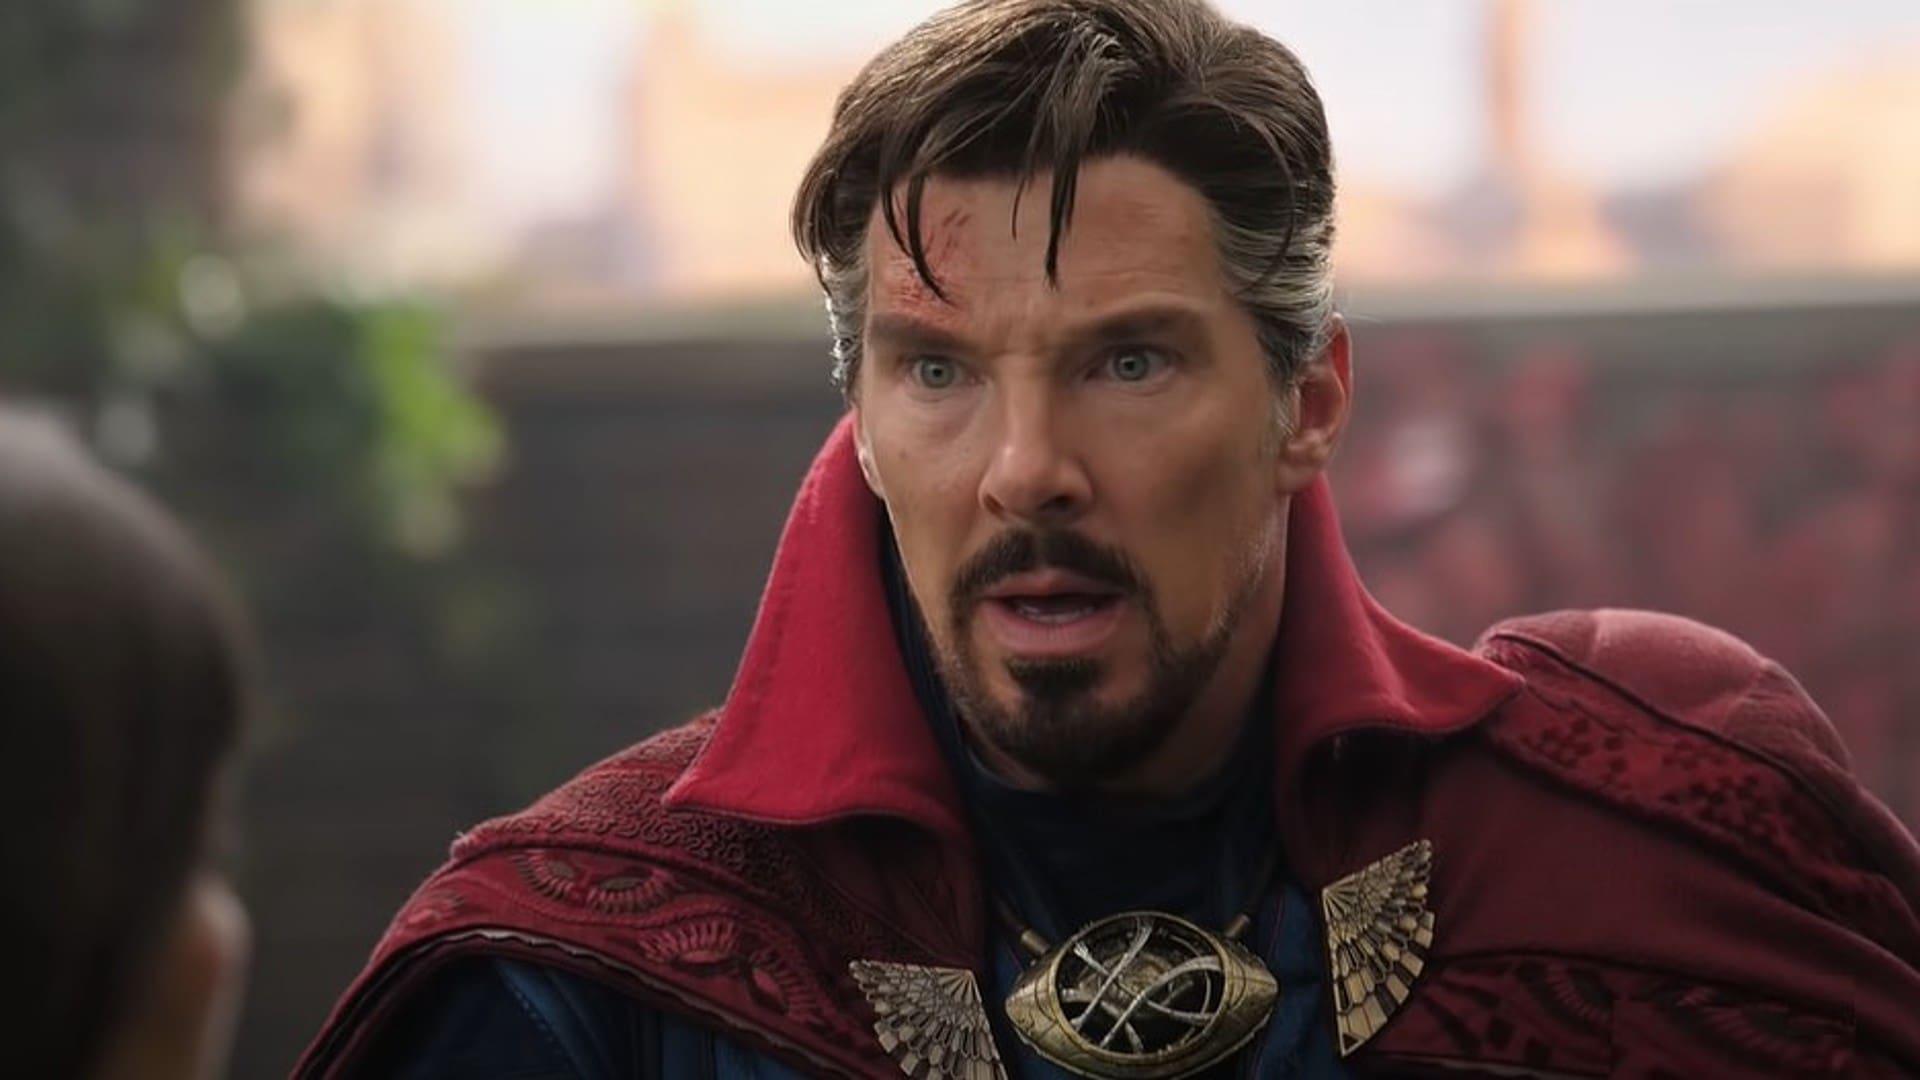 'I was expecting something more': why did Benedict Cumberbatch turned down the role in the movie 'Thor'?